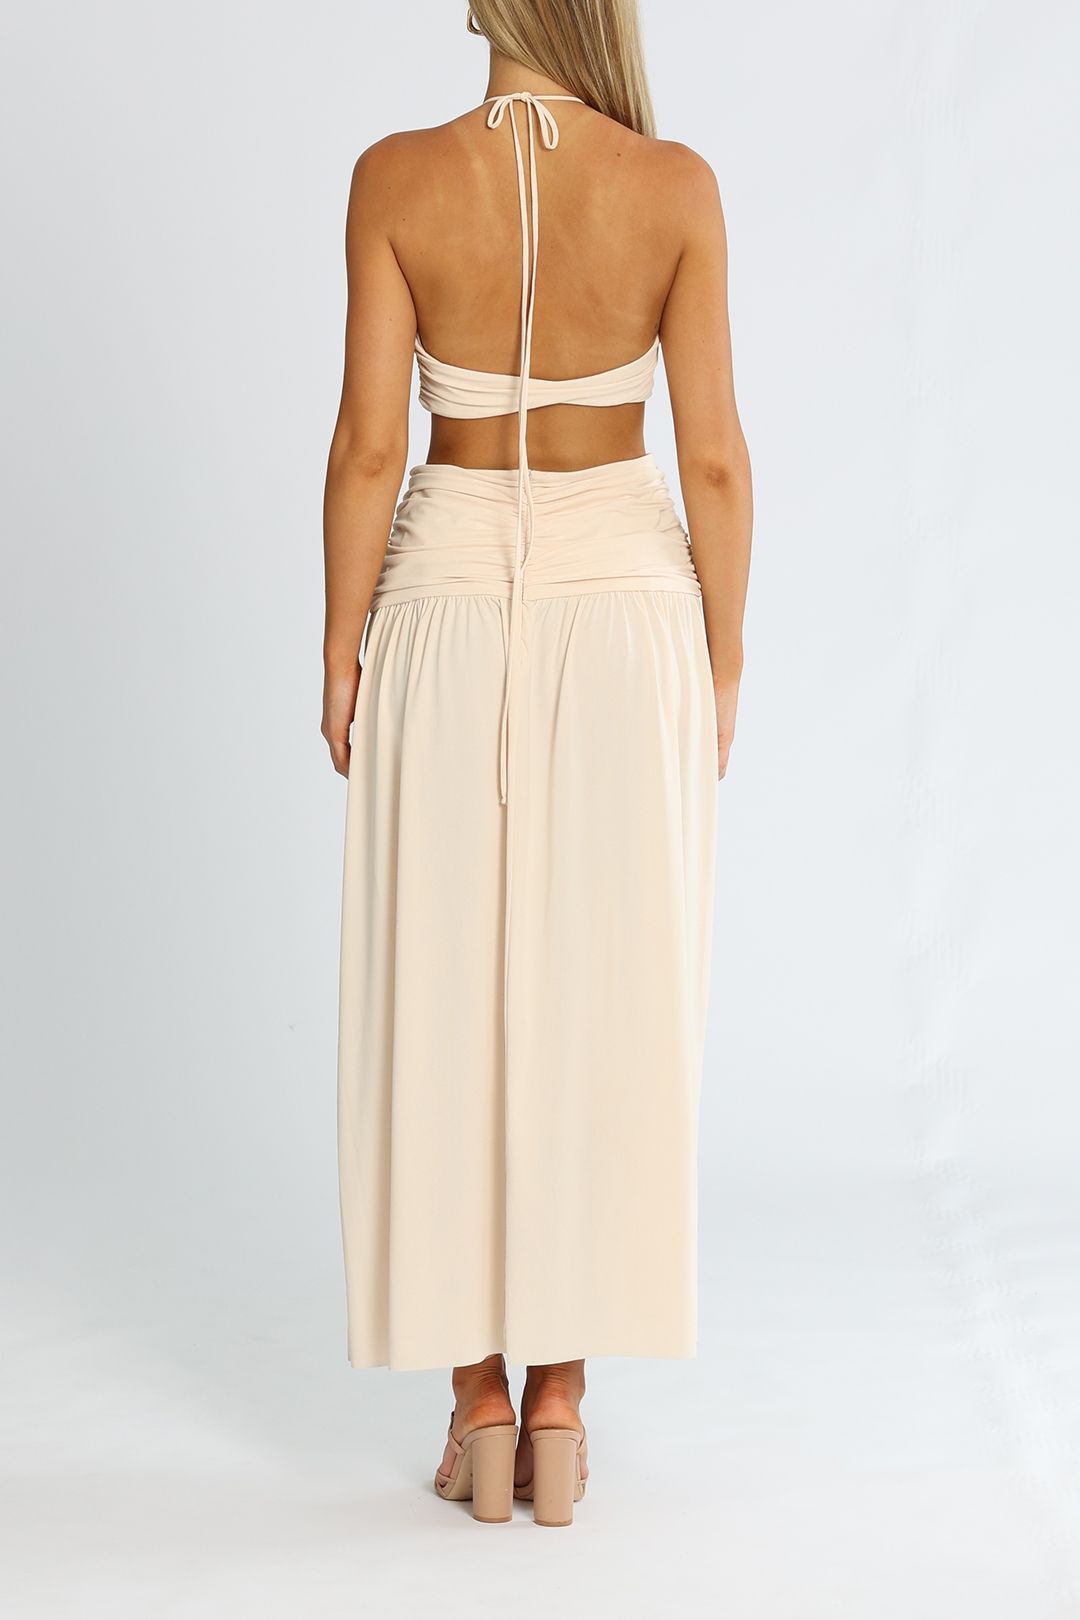 Bec and Bridge Adaline Cut Out Maxi Dress Ivory Ruch